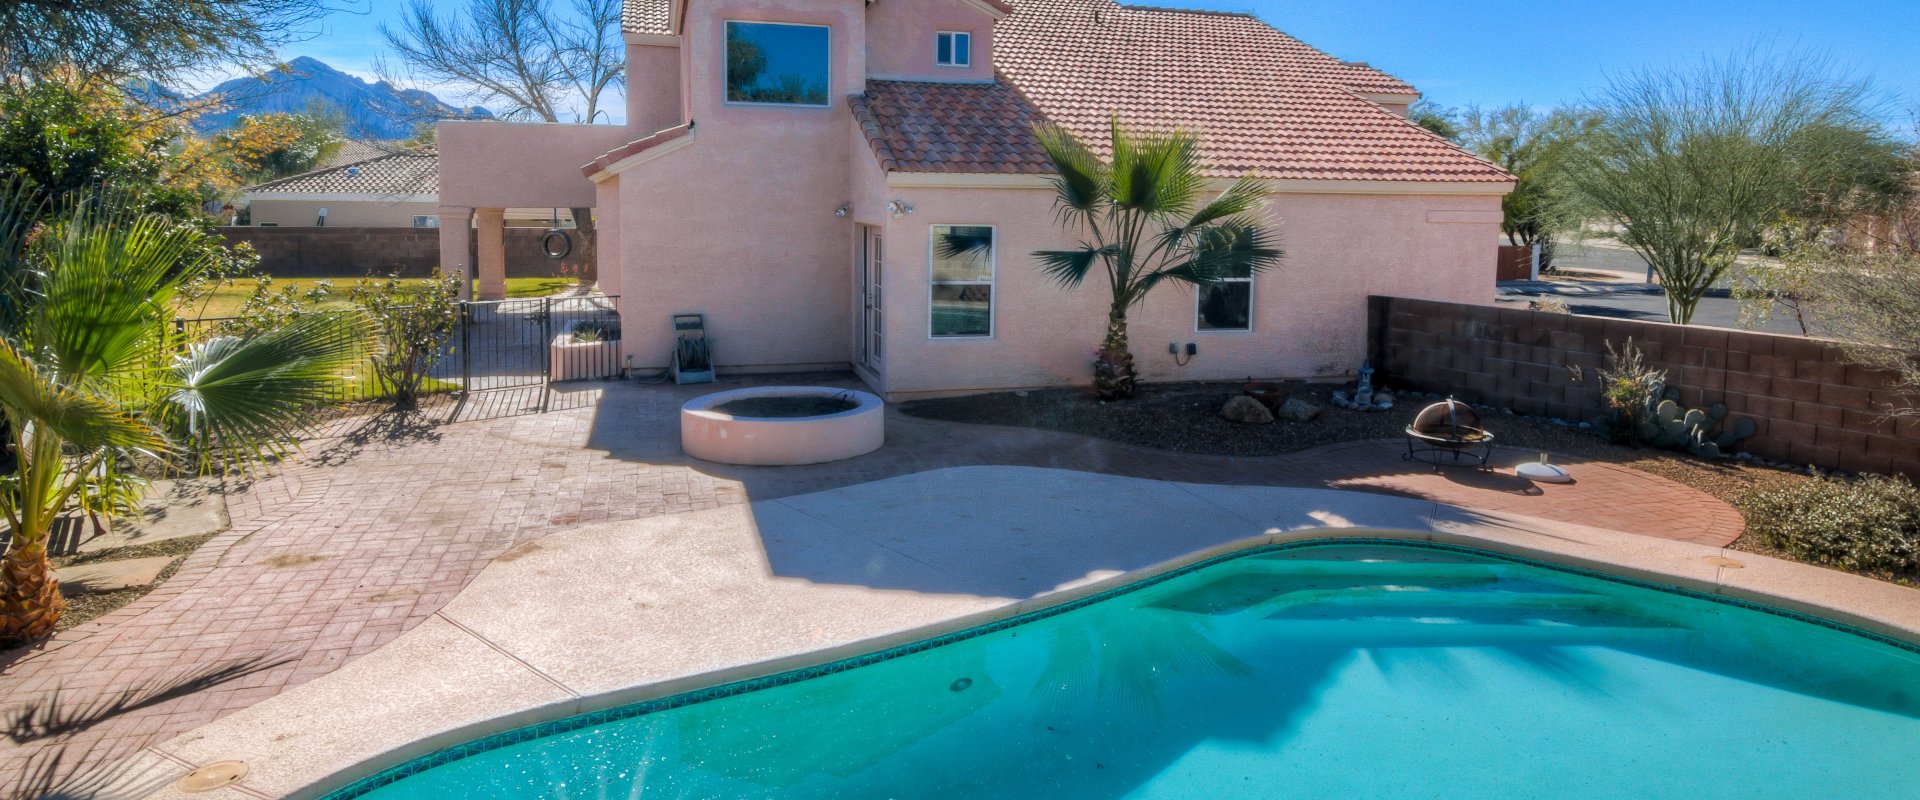 sell tucson home with a pool